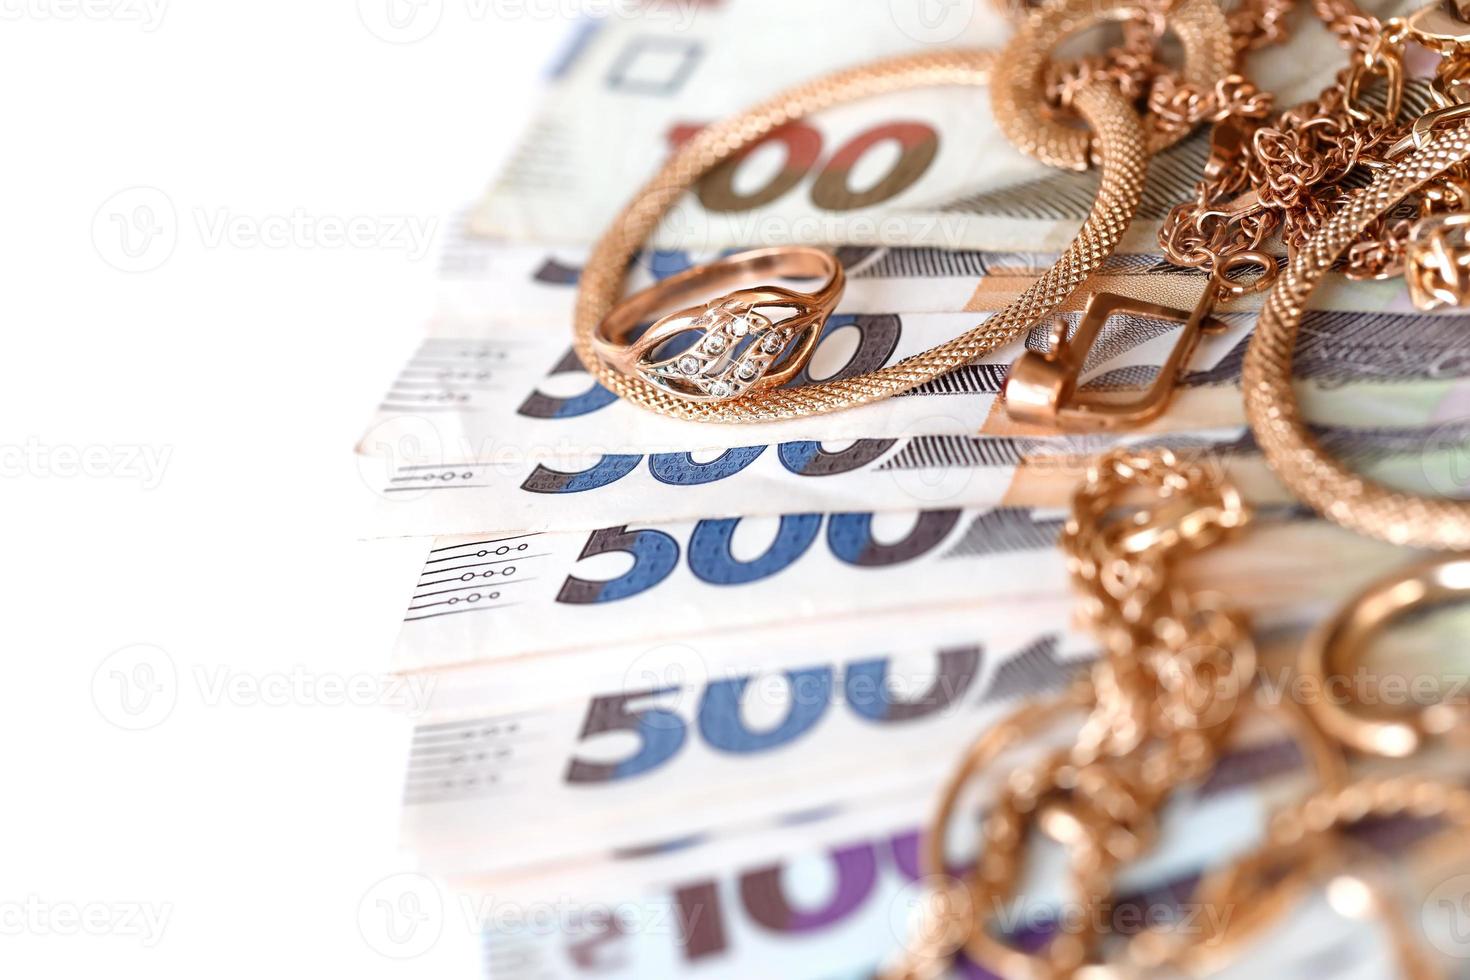 Many expensive golden jewerly rings, earrings and necklaces with big amount of Ukrainian money bills. Pawnshop or jewerly shop concept. Jewelry trading photo